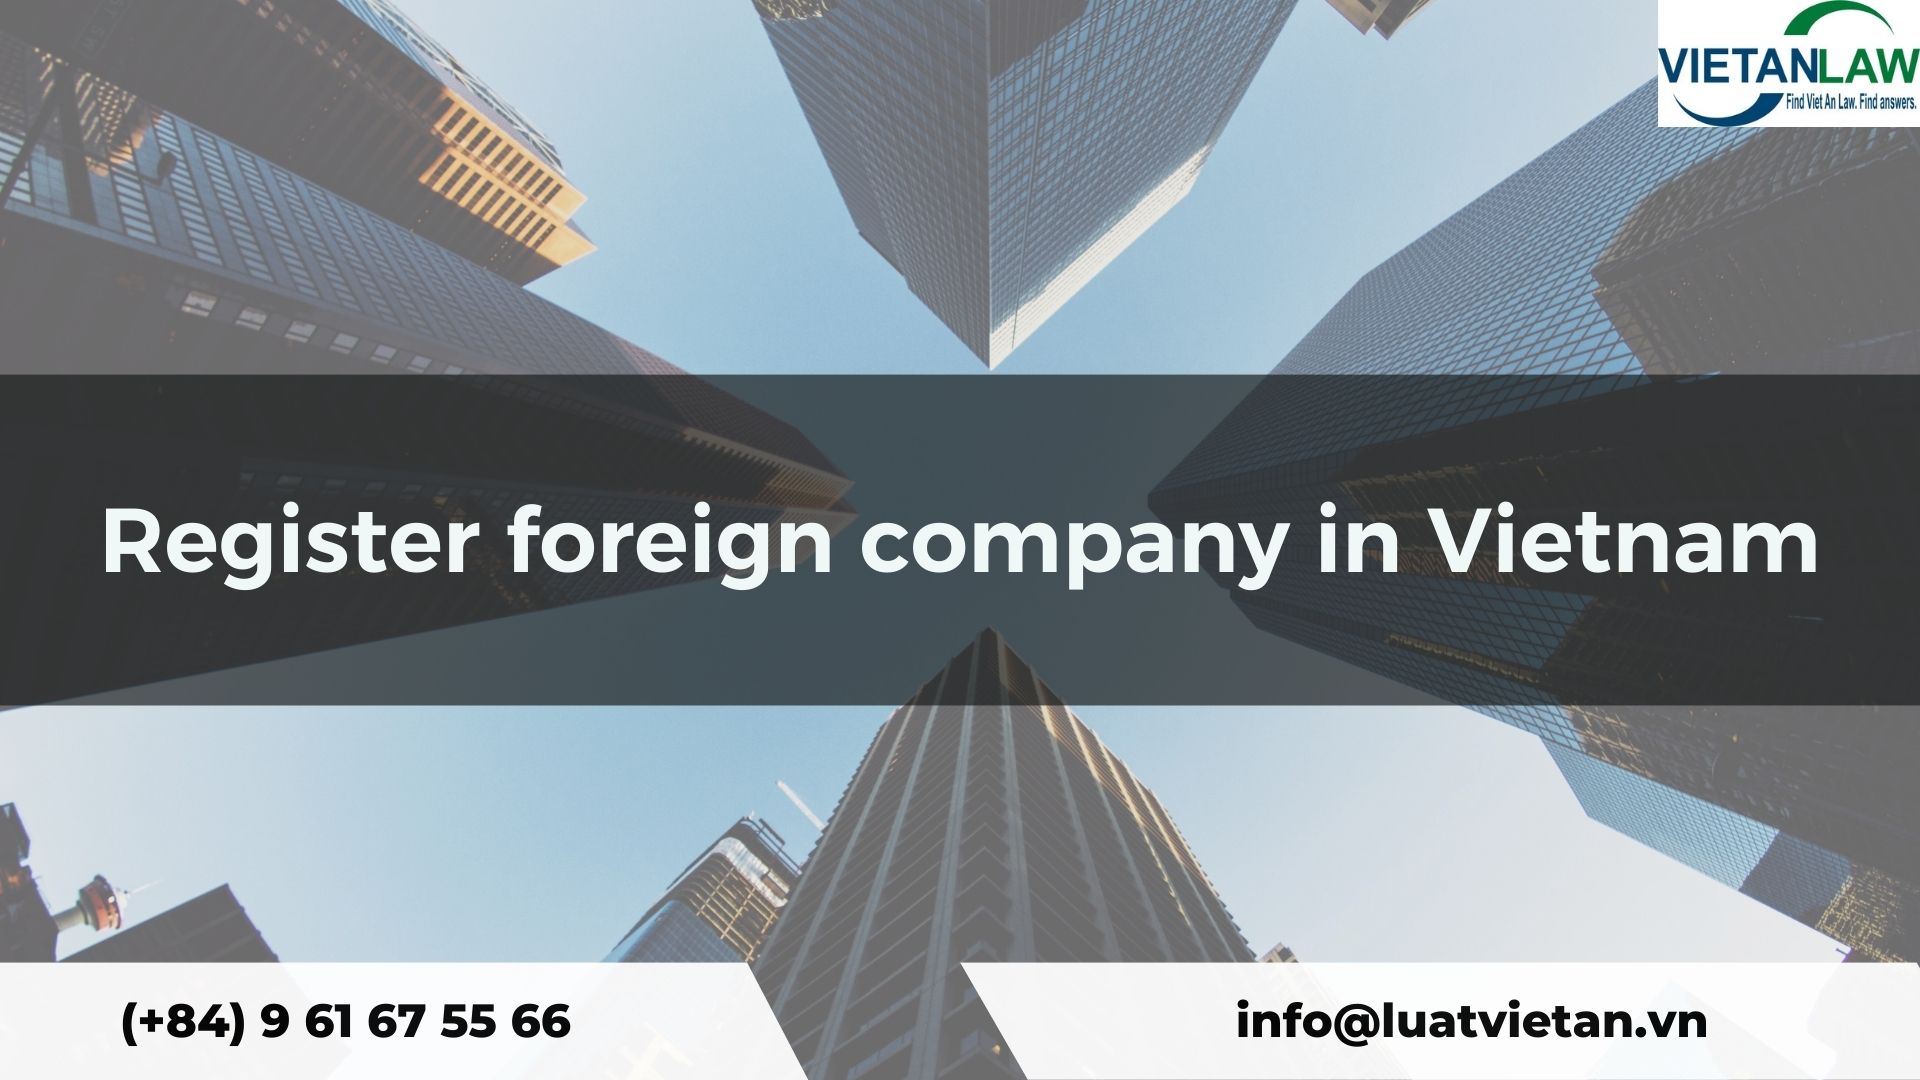 Register foreign company in Vietnam